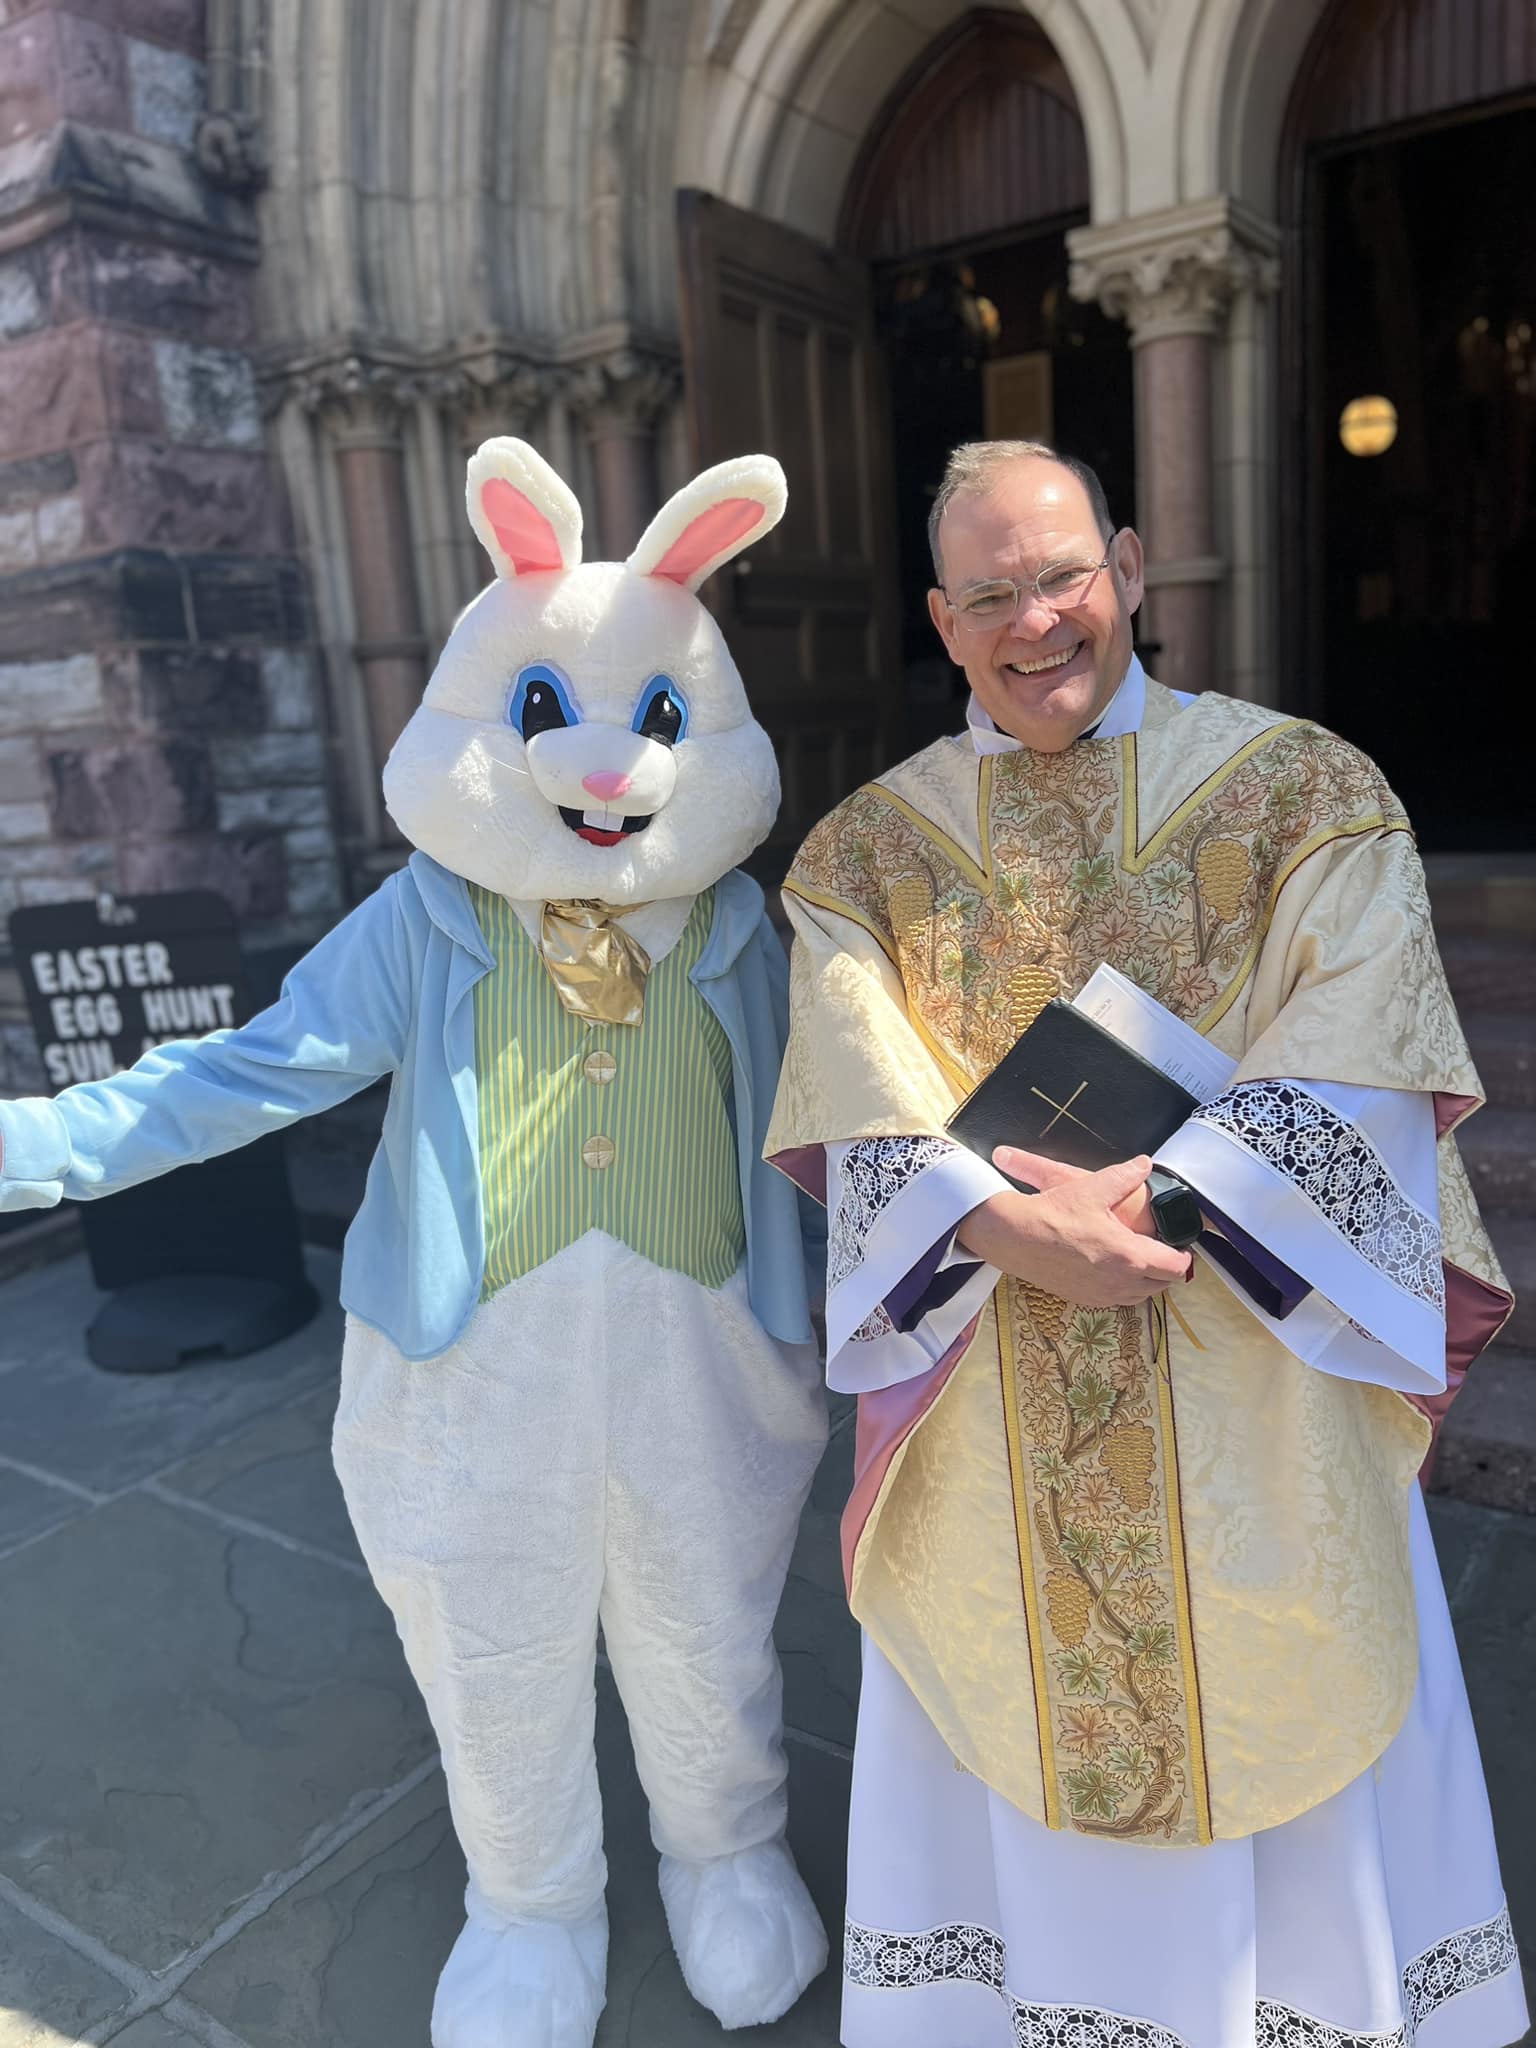 priest in gold and white vestments standing next to easter bunny